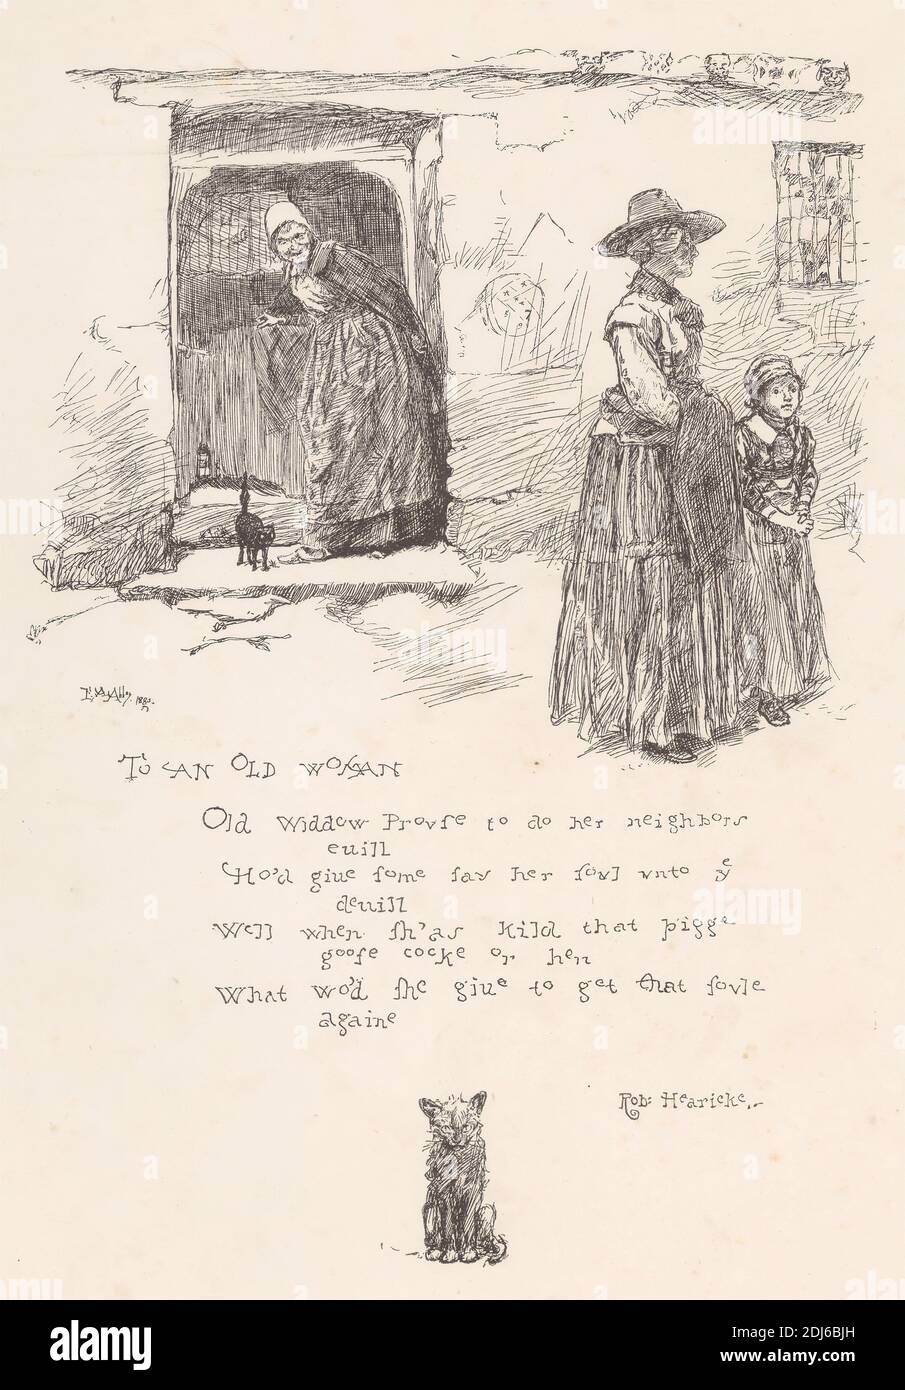 To an Old Woman, by Robert Herrick, Print made by Edwin Austin Abbey, 1852–1911, American, 1883, Line photoengraving on medium, slightly textured, cream wove paper, cats (domestic cats), child, doorway, faces, genre subject, window Stock Photo